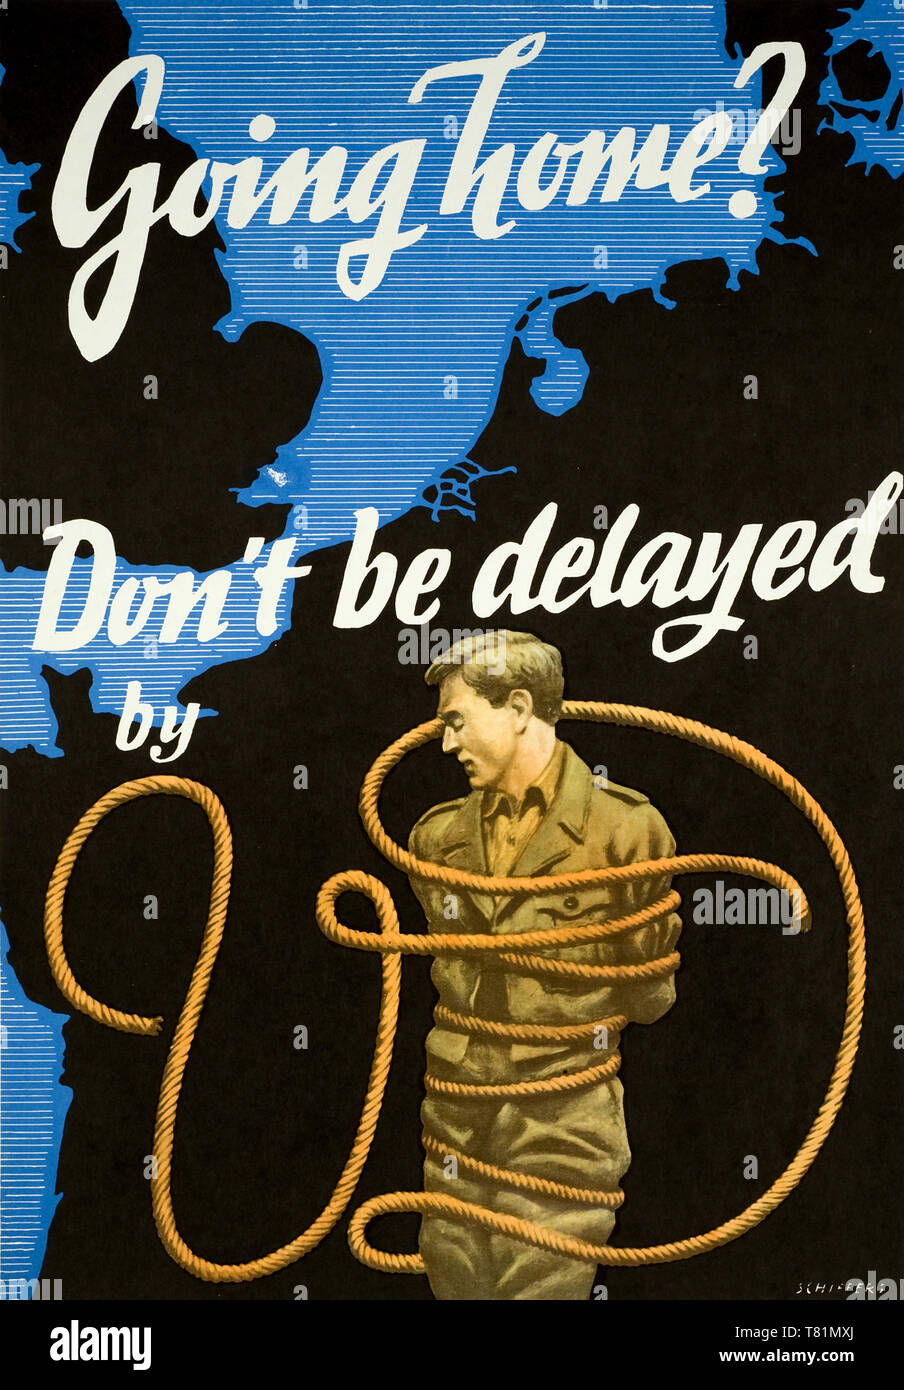 WWII STD Poster, Don't Be Delayed by VD Stock Photo